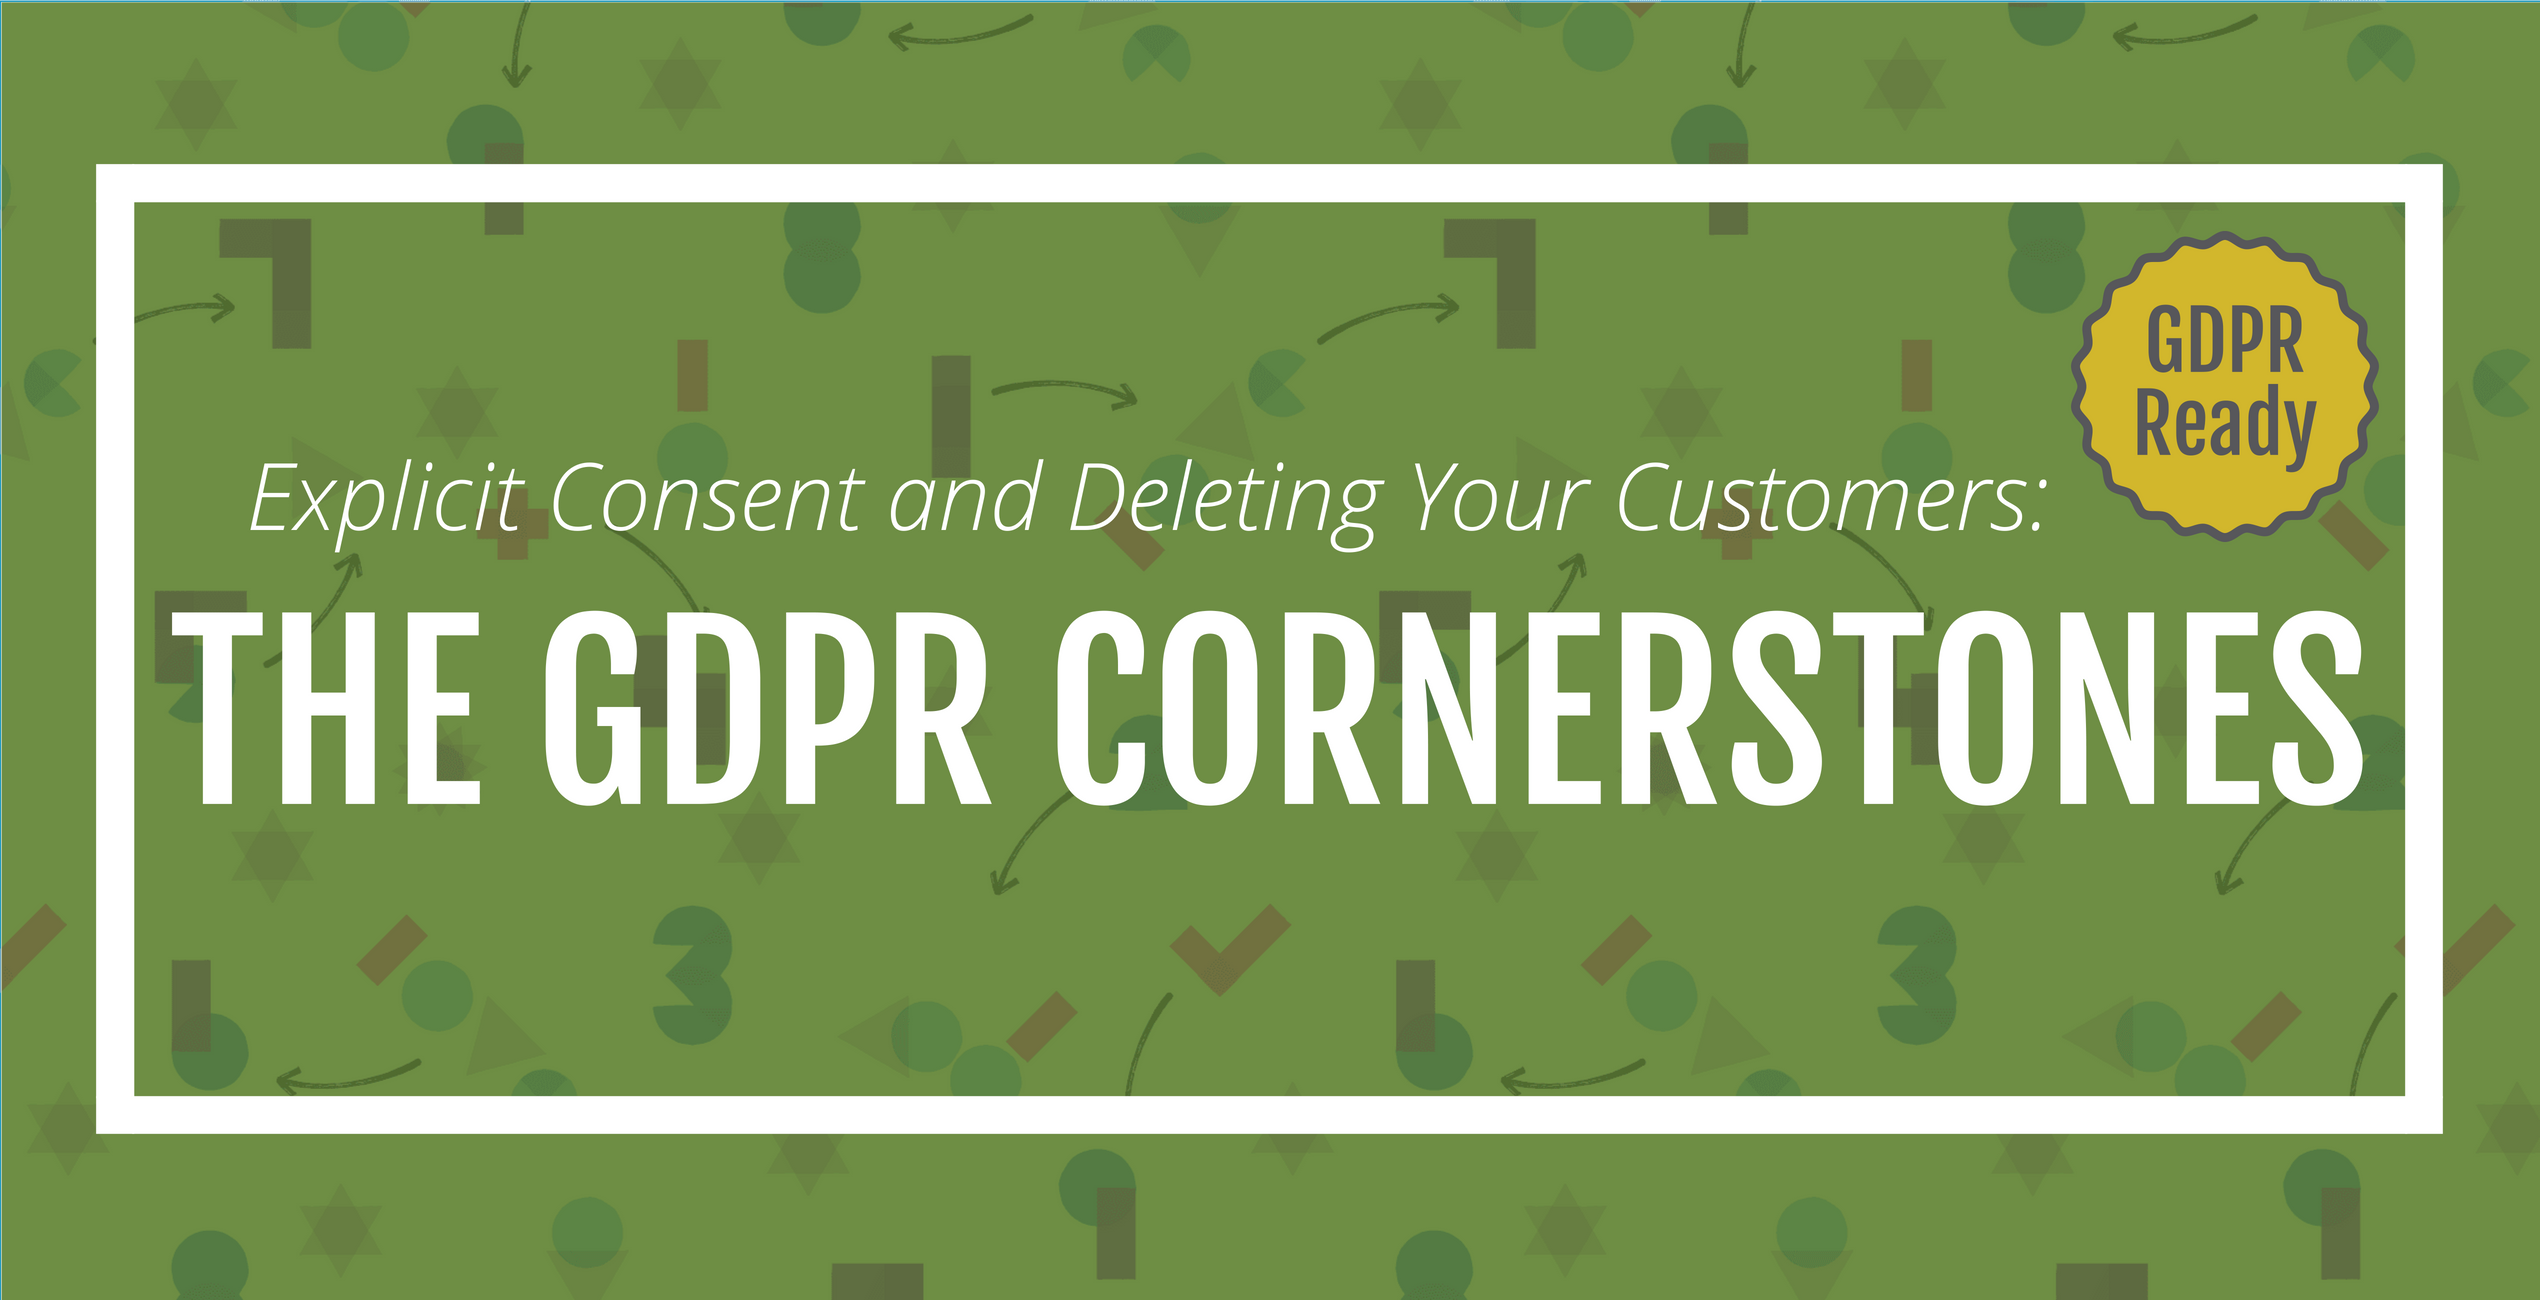 Explicit Consent and Deleting Your Customers: The GDPR Cornerstones